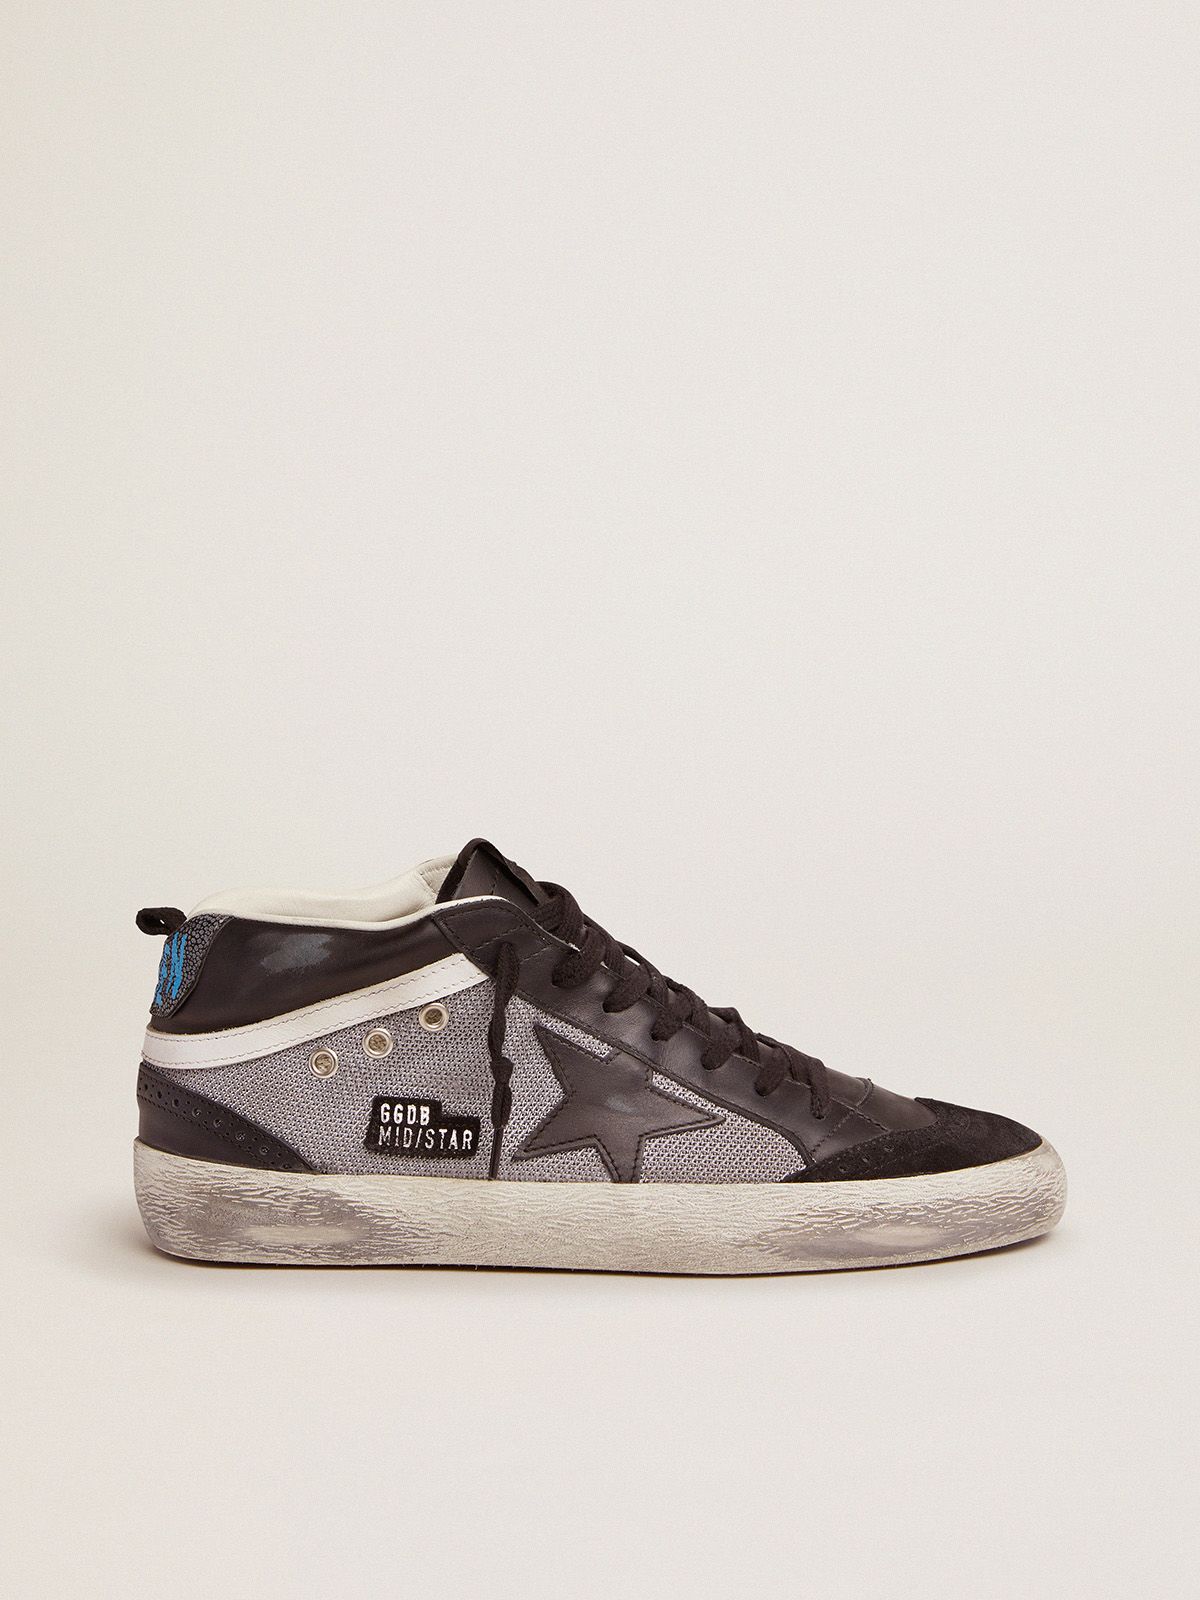 Mid Star sneakers in black leather and silver mesh | 